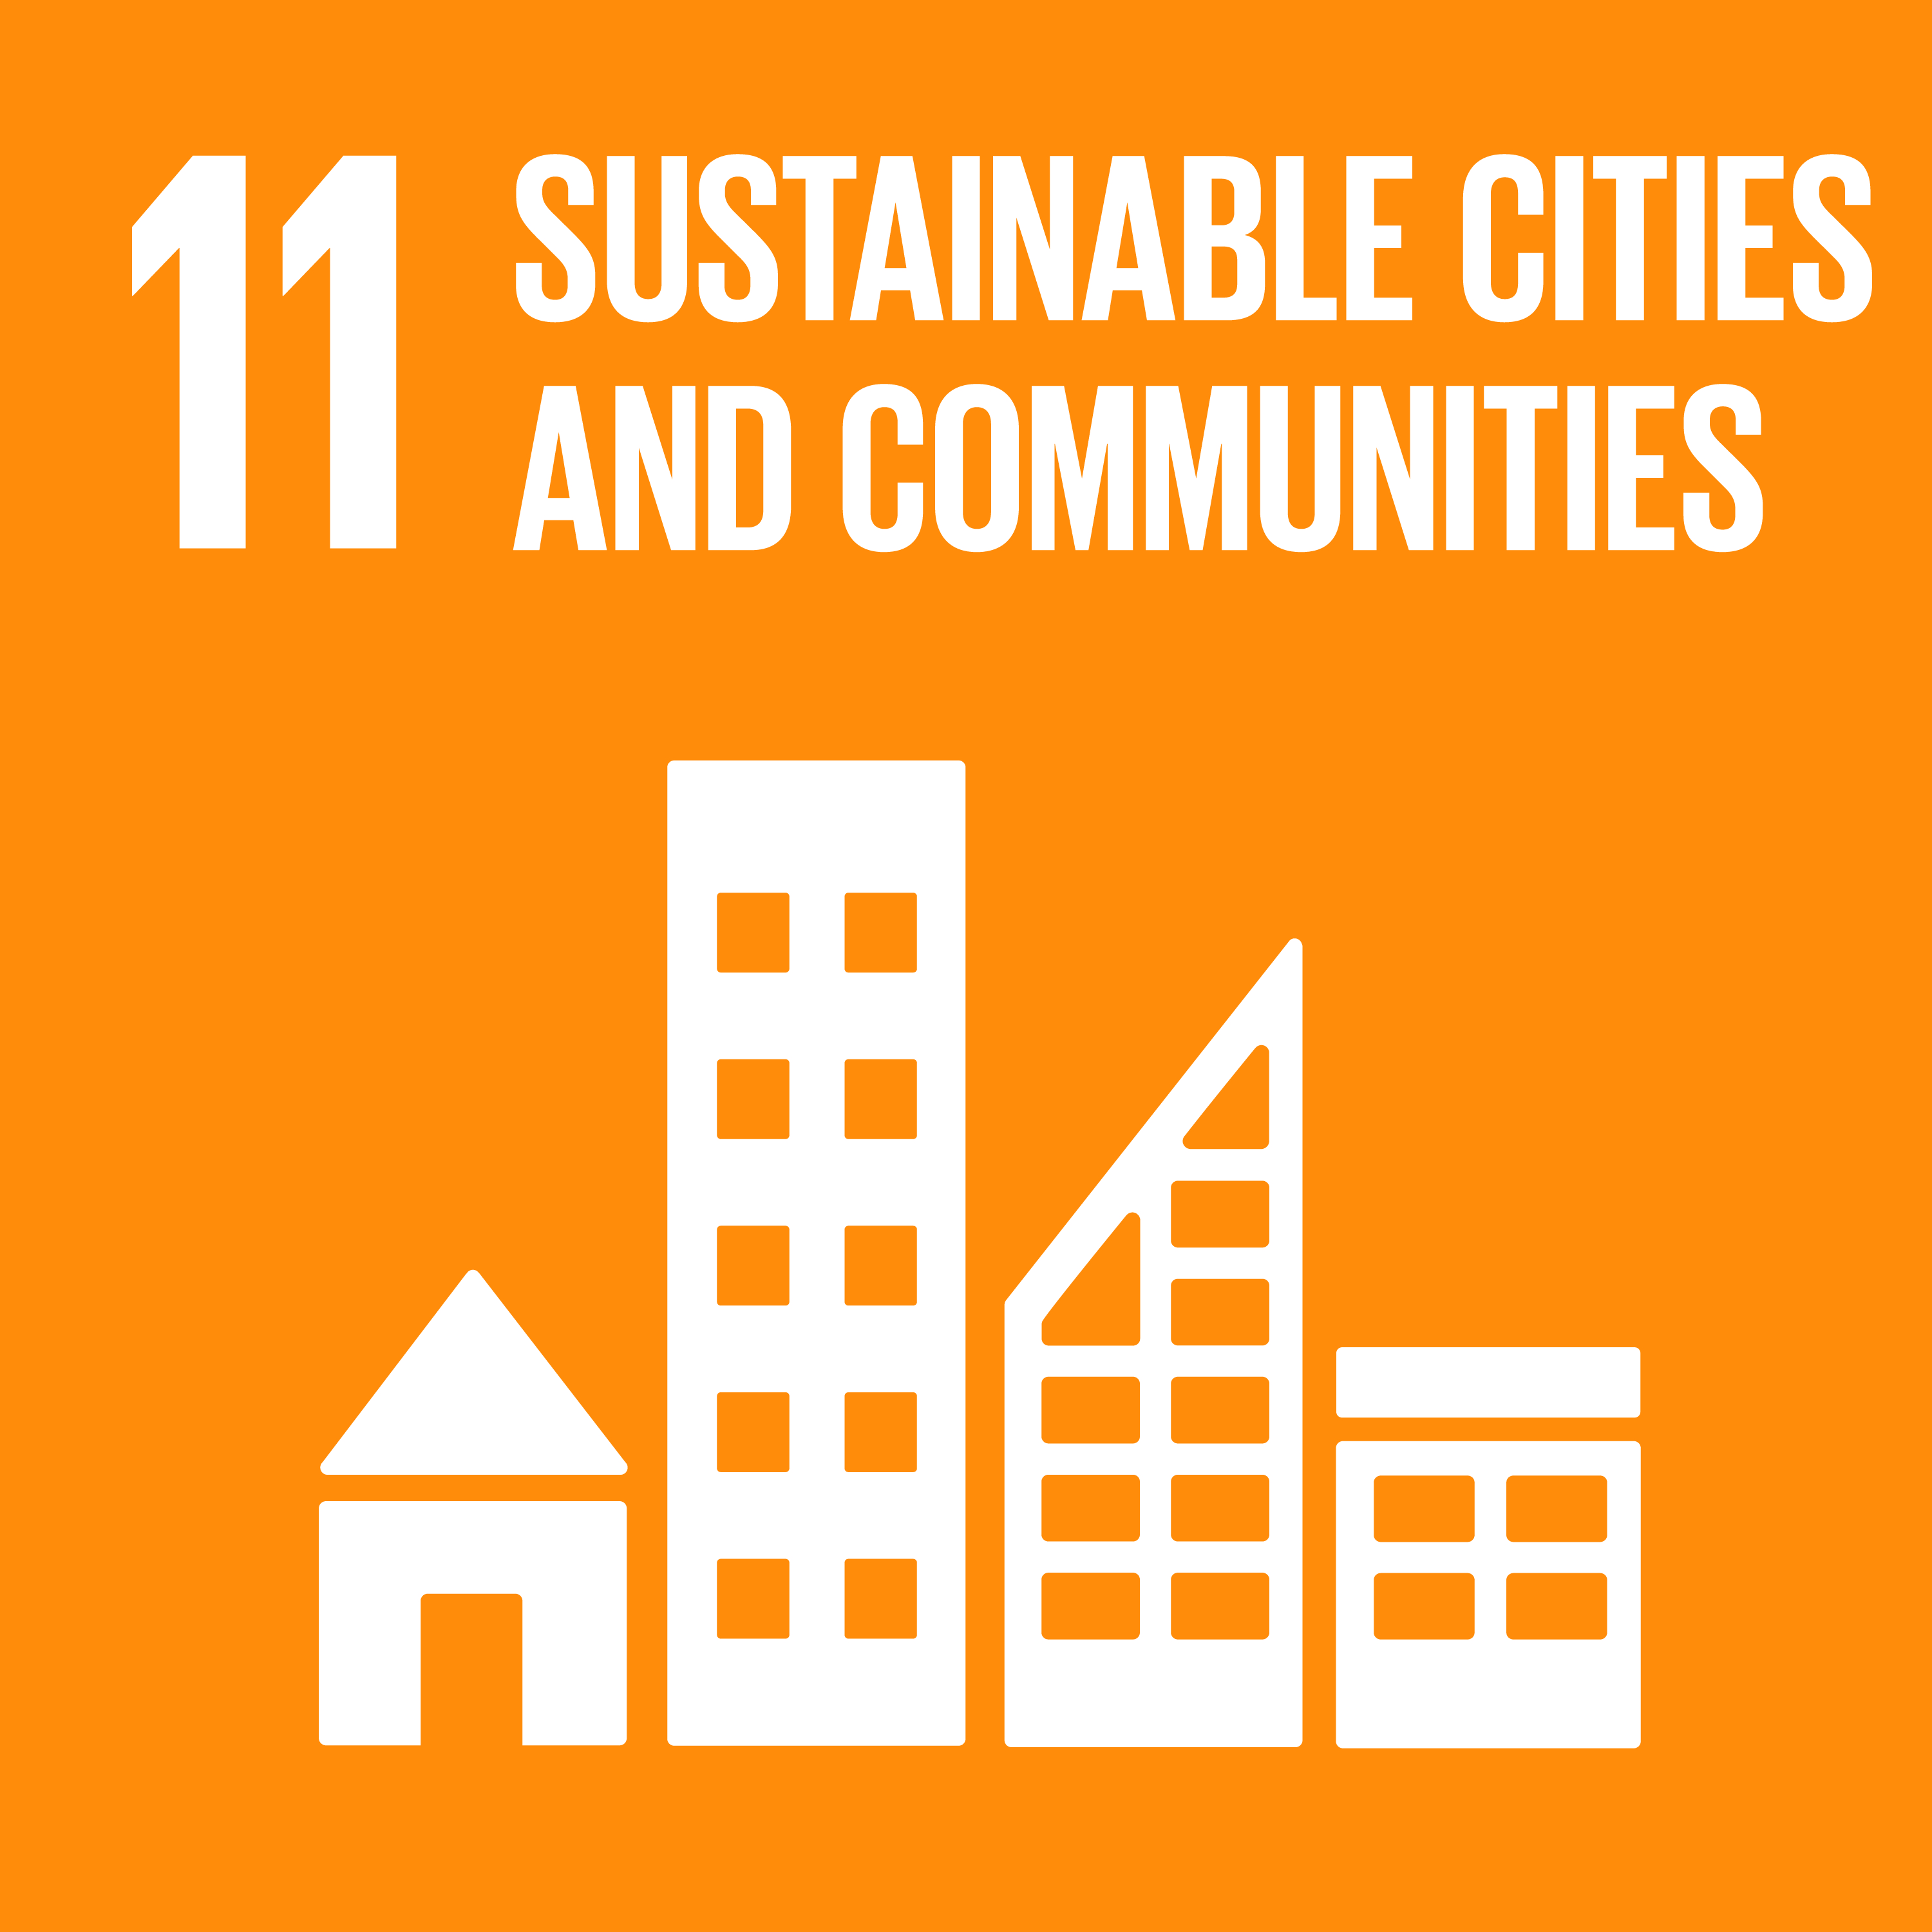 Goal 11: Sustainable citiies and communities